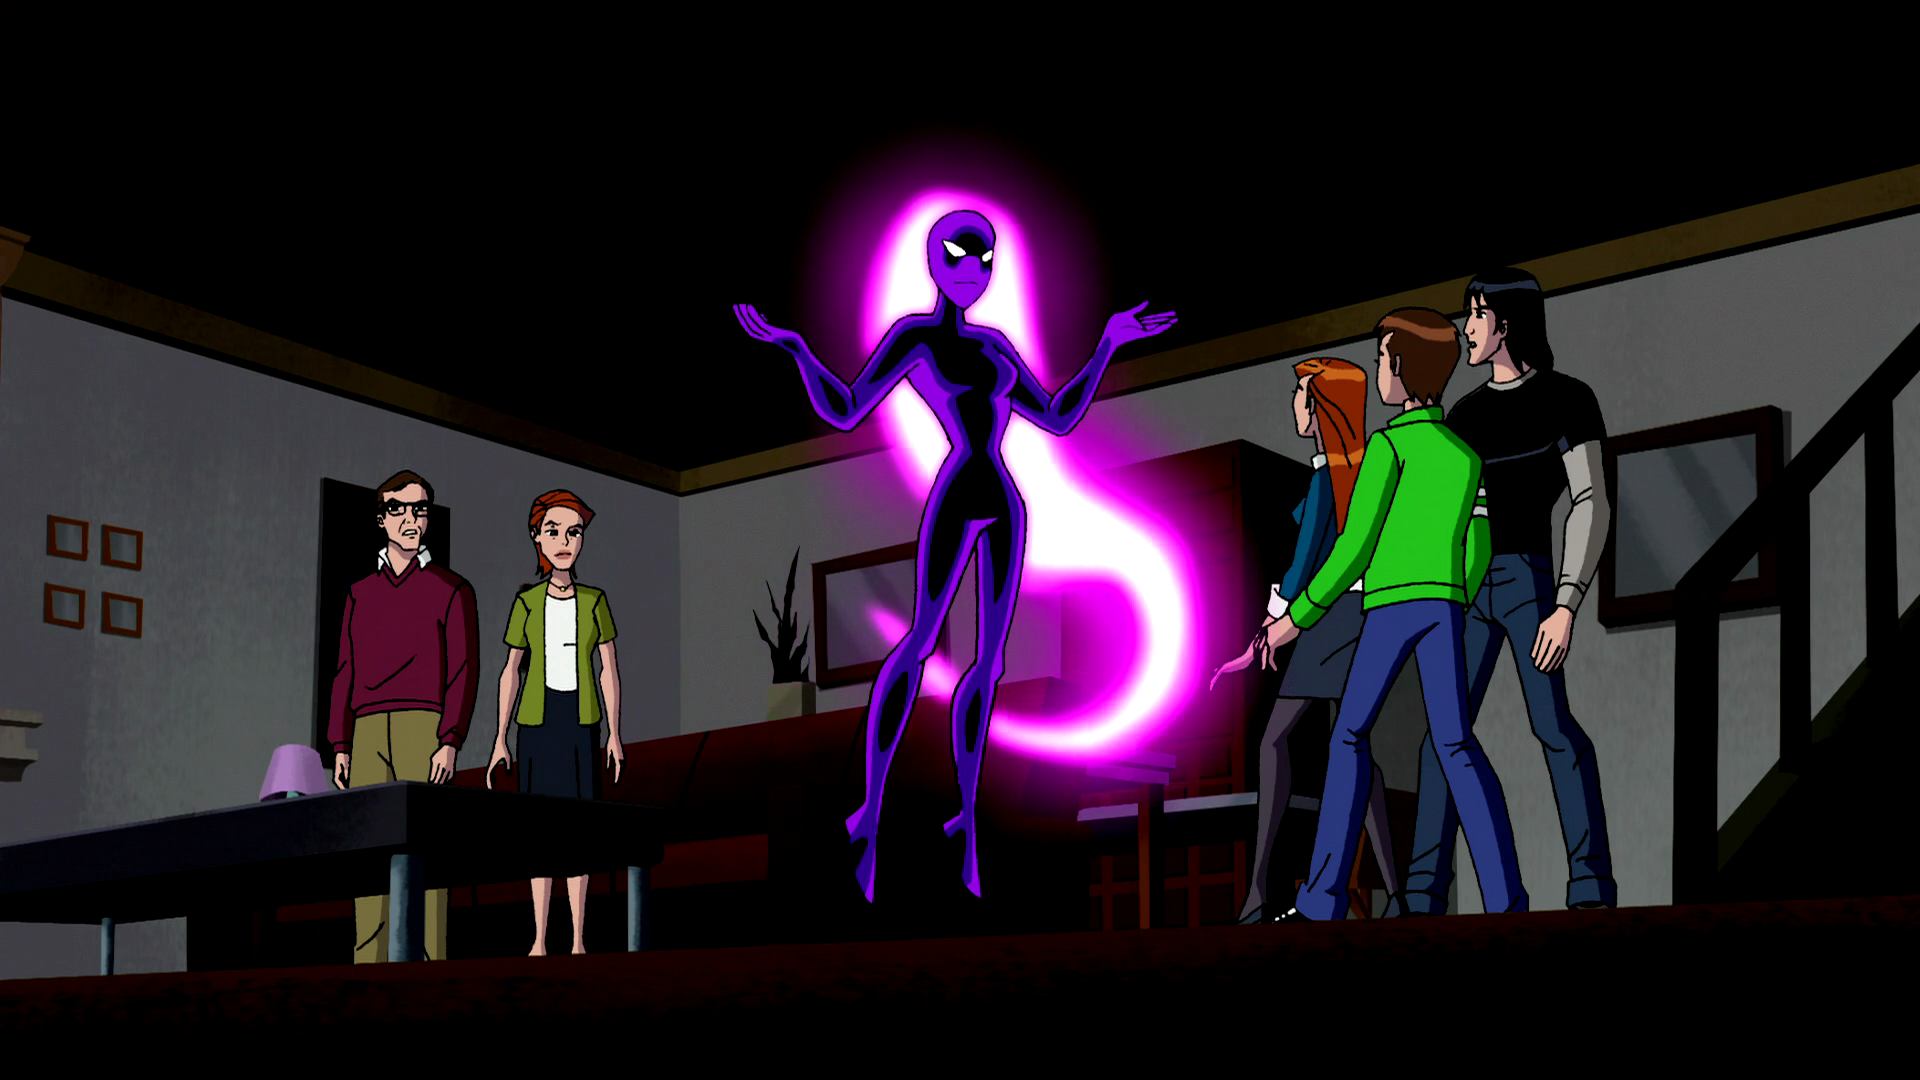 Everybody Talks About the Weather, Ben 10 Wiki